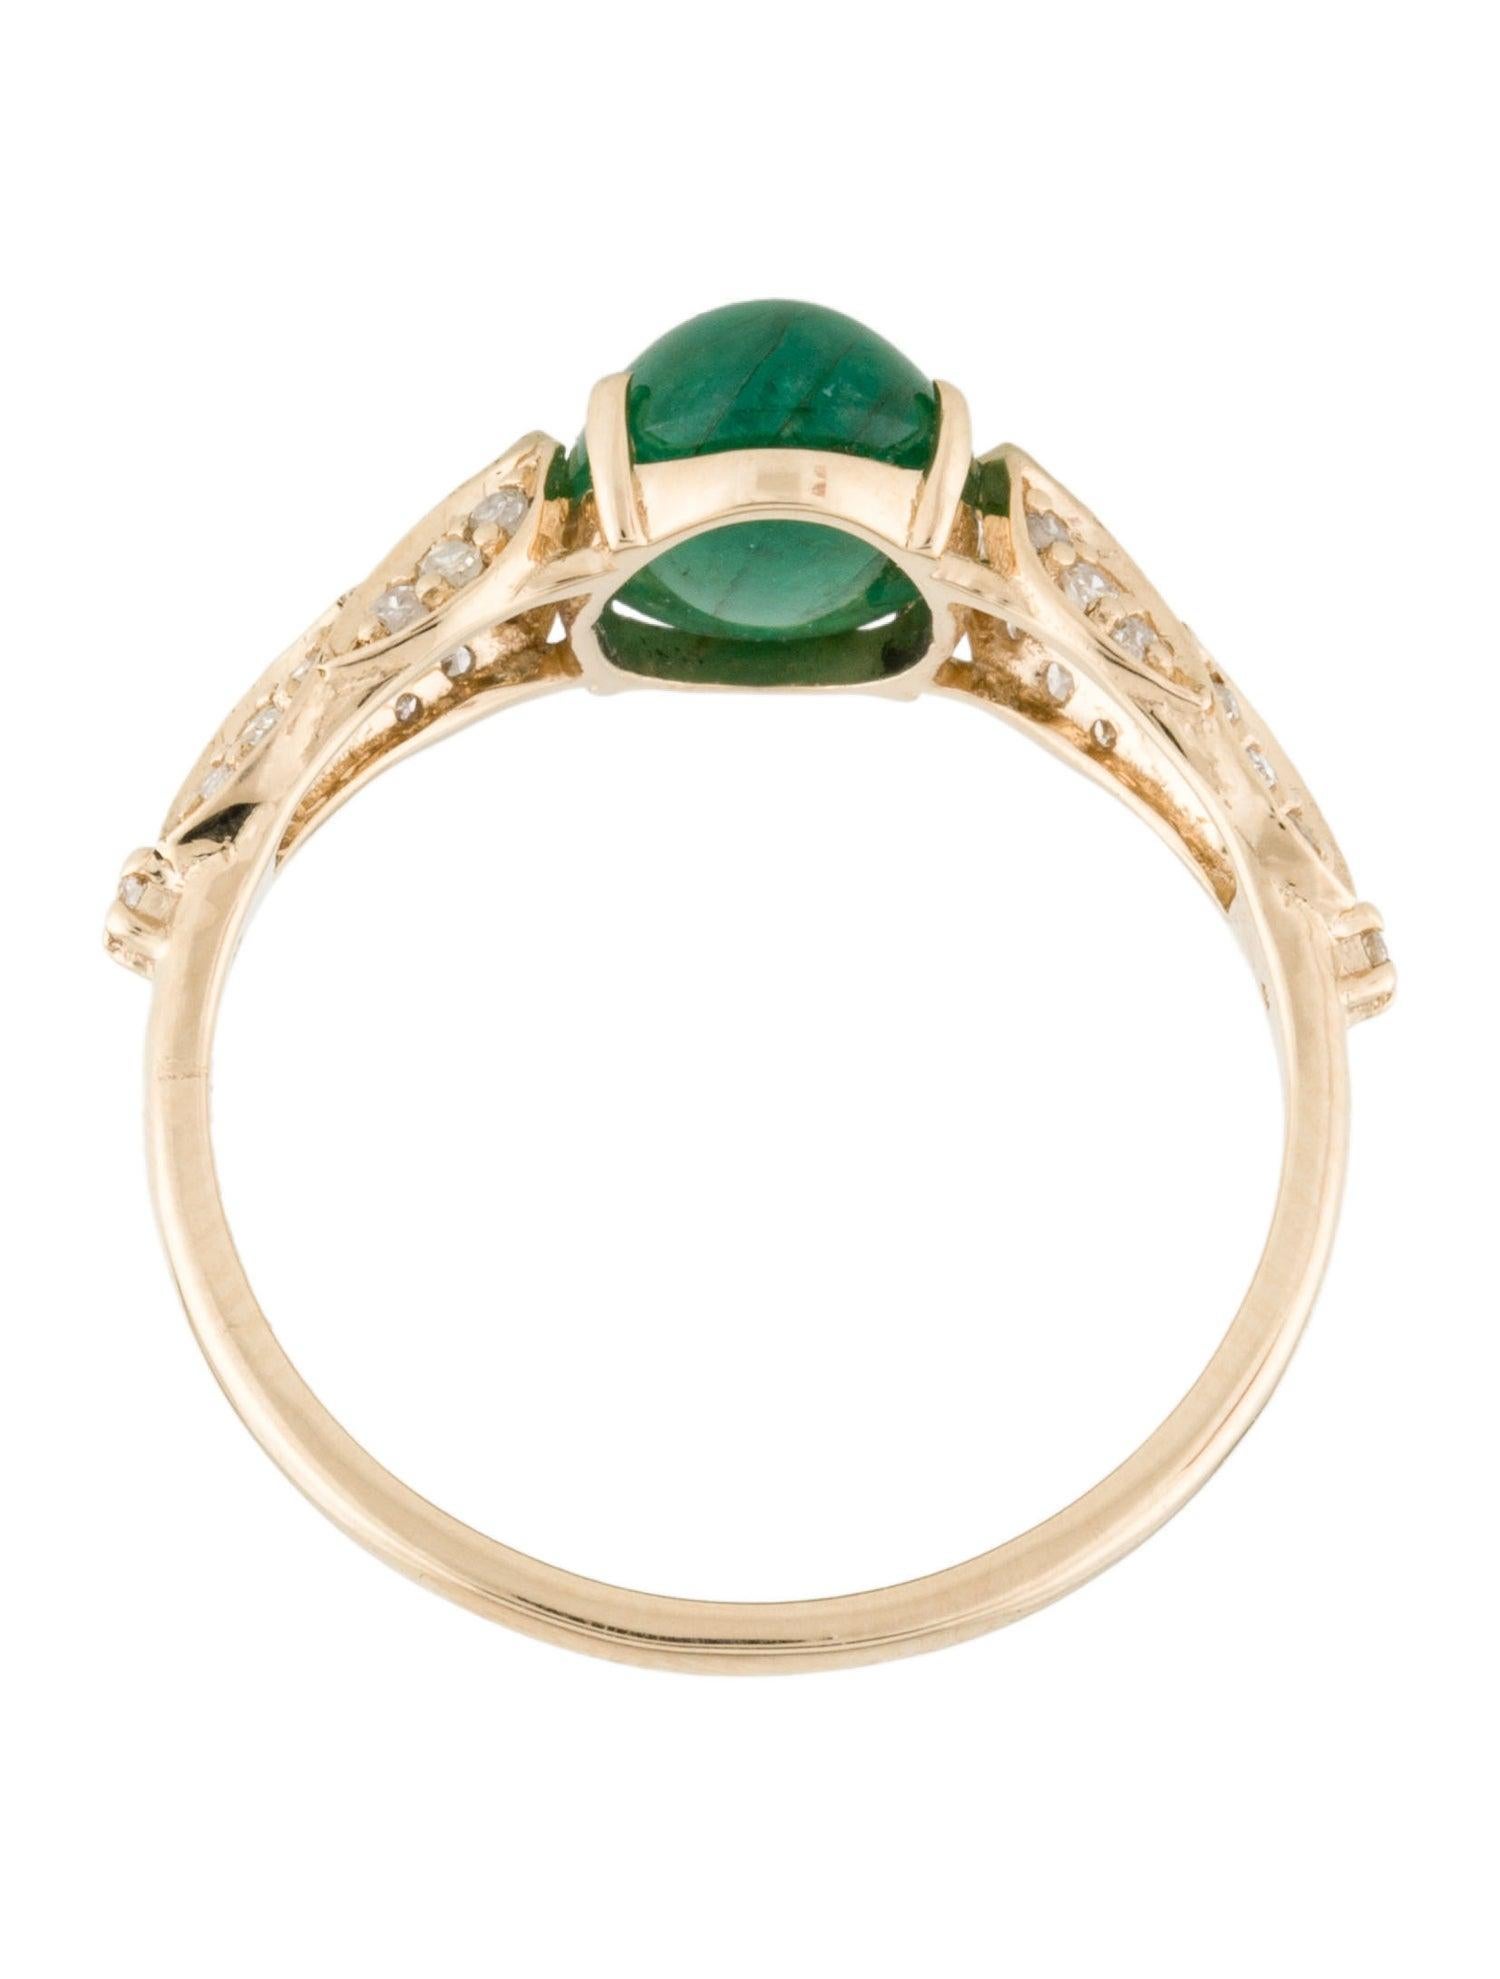 Luxurious 14K Emerald & Diamond Cocktail Ring - 2.90ct Gemstone - Size 8 In New Condition For Sale In Holtsville, NY